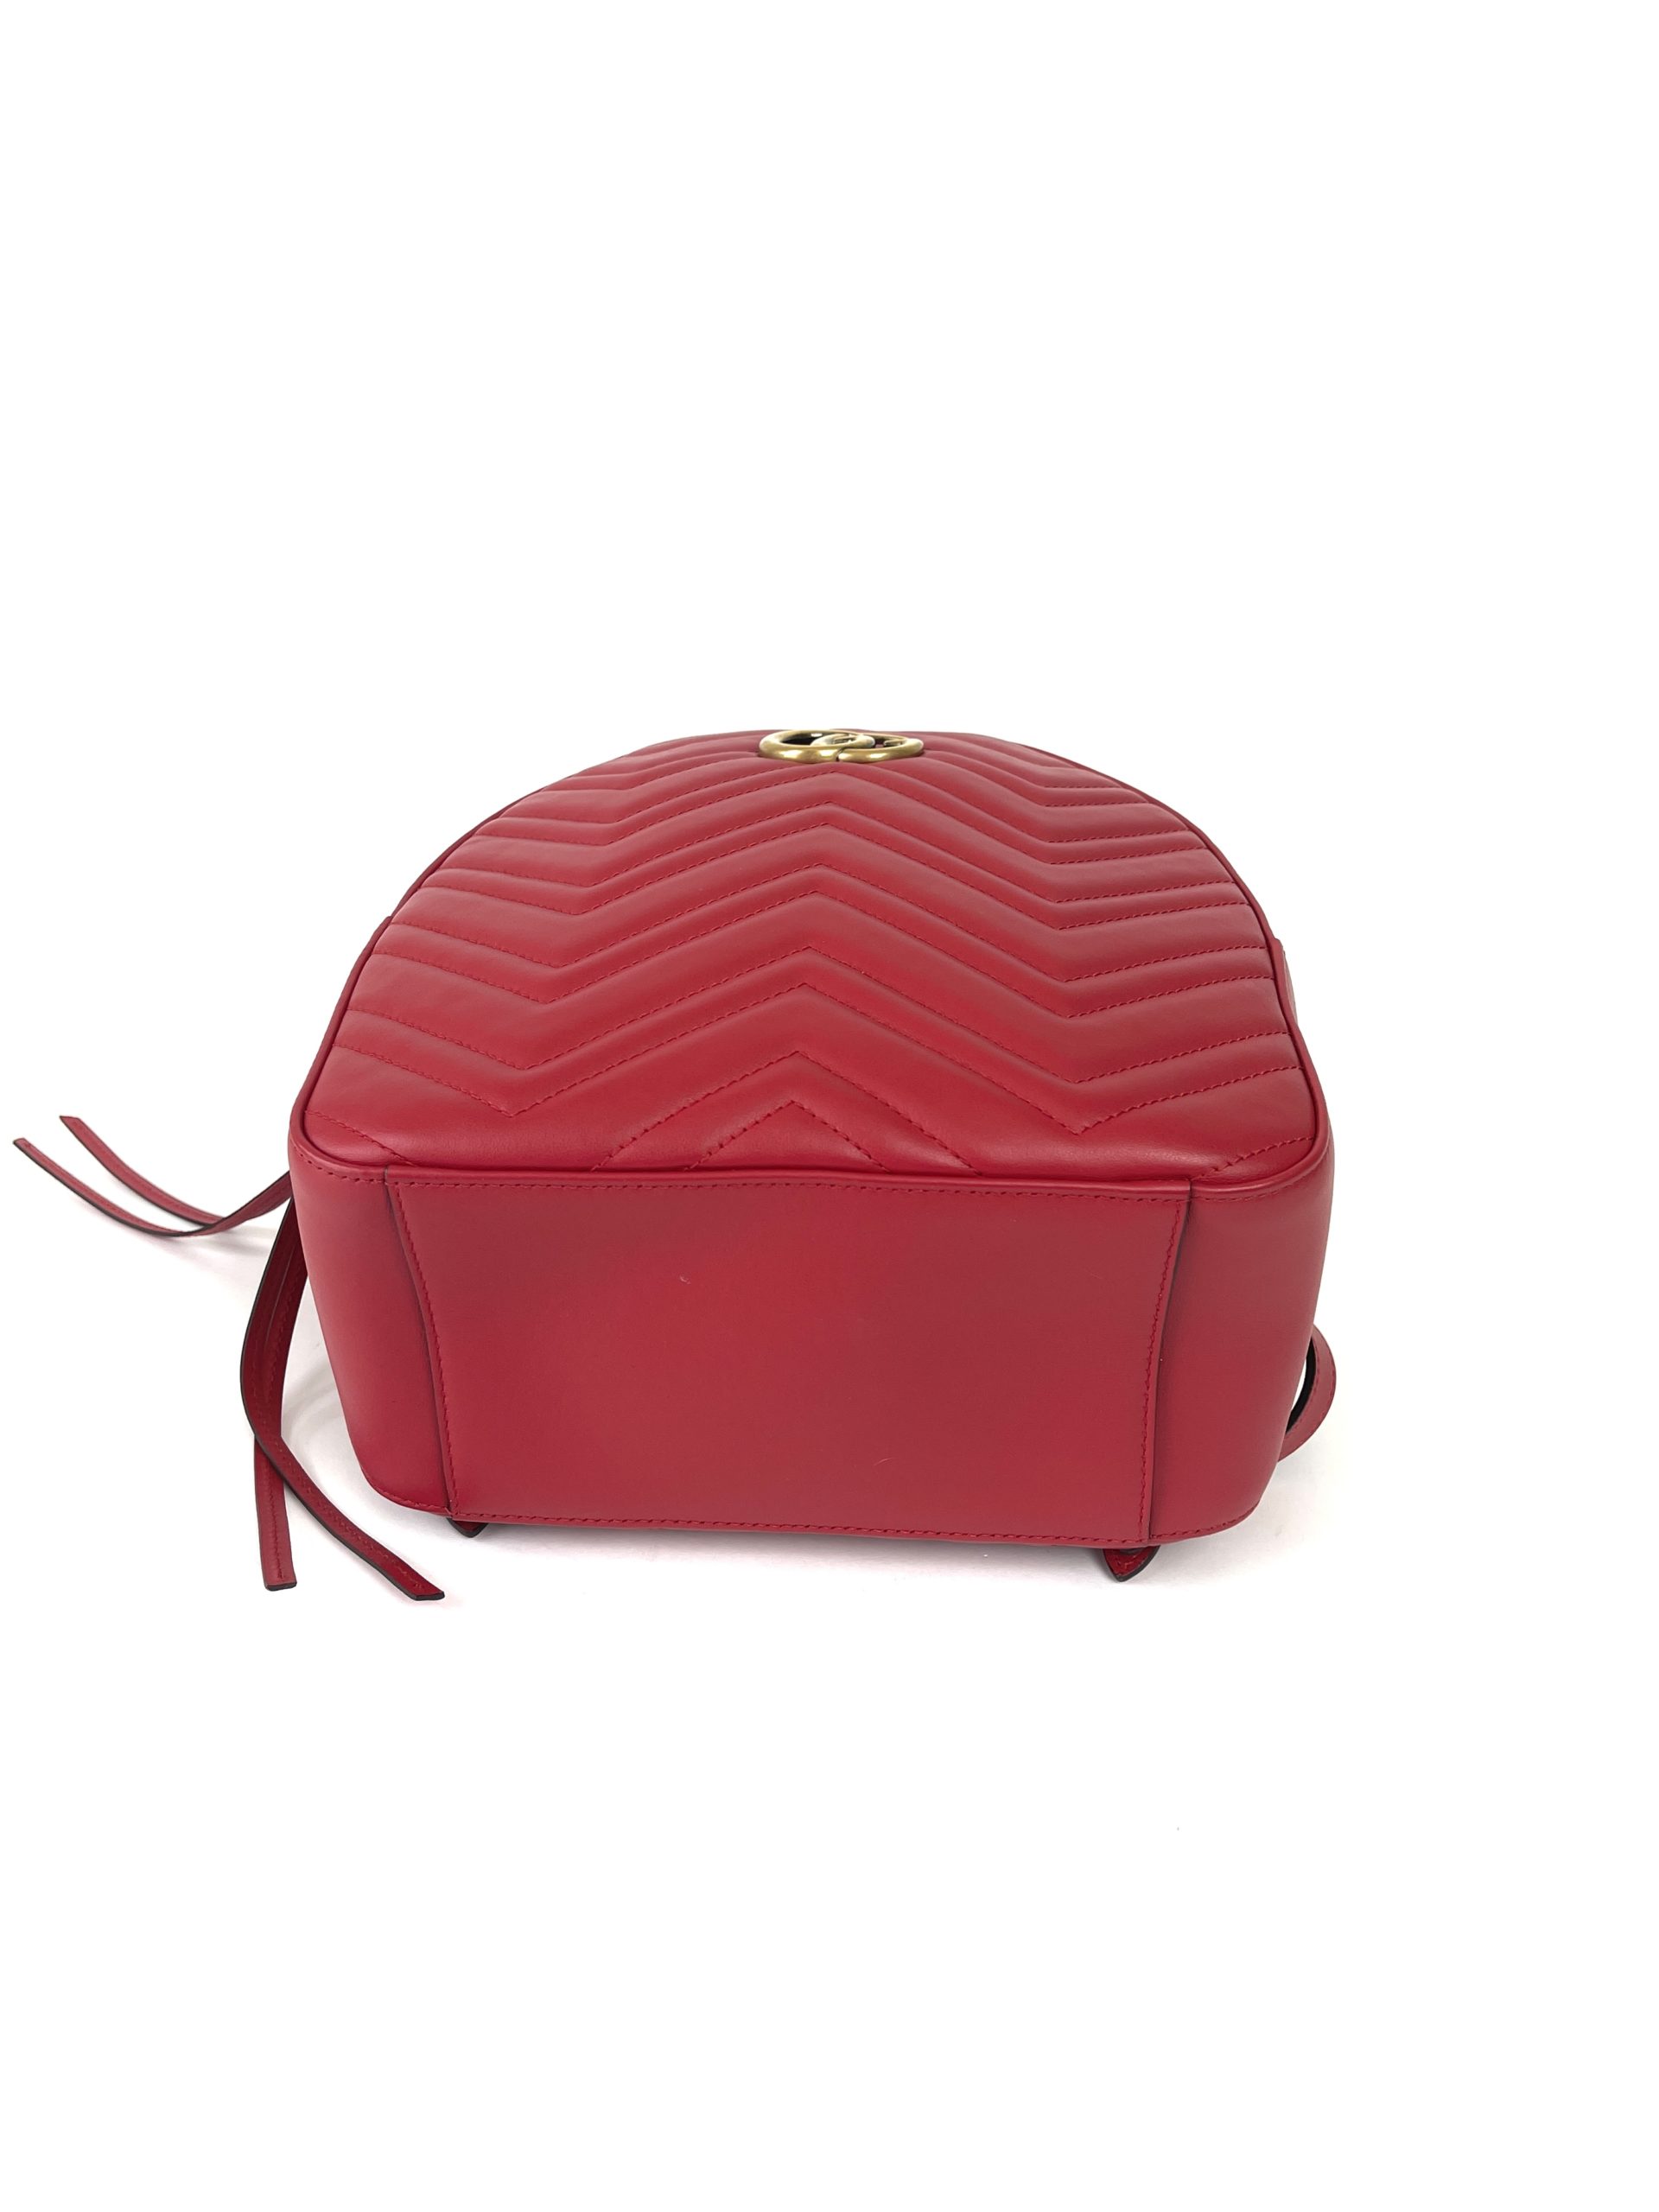 Gucci GG Marmont Mini Backpack in Red